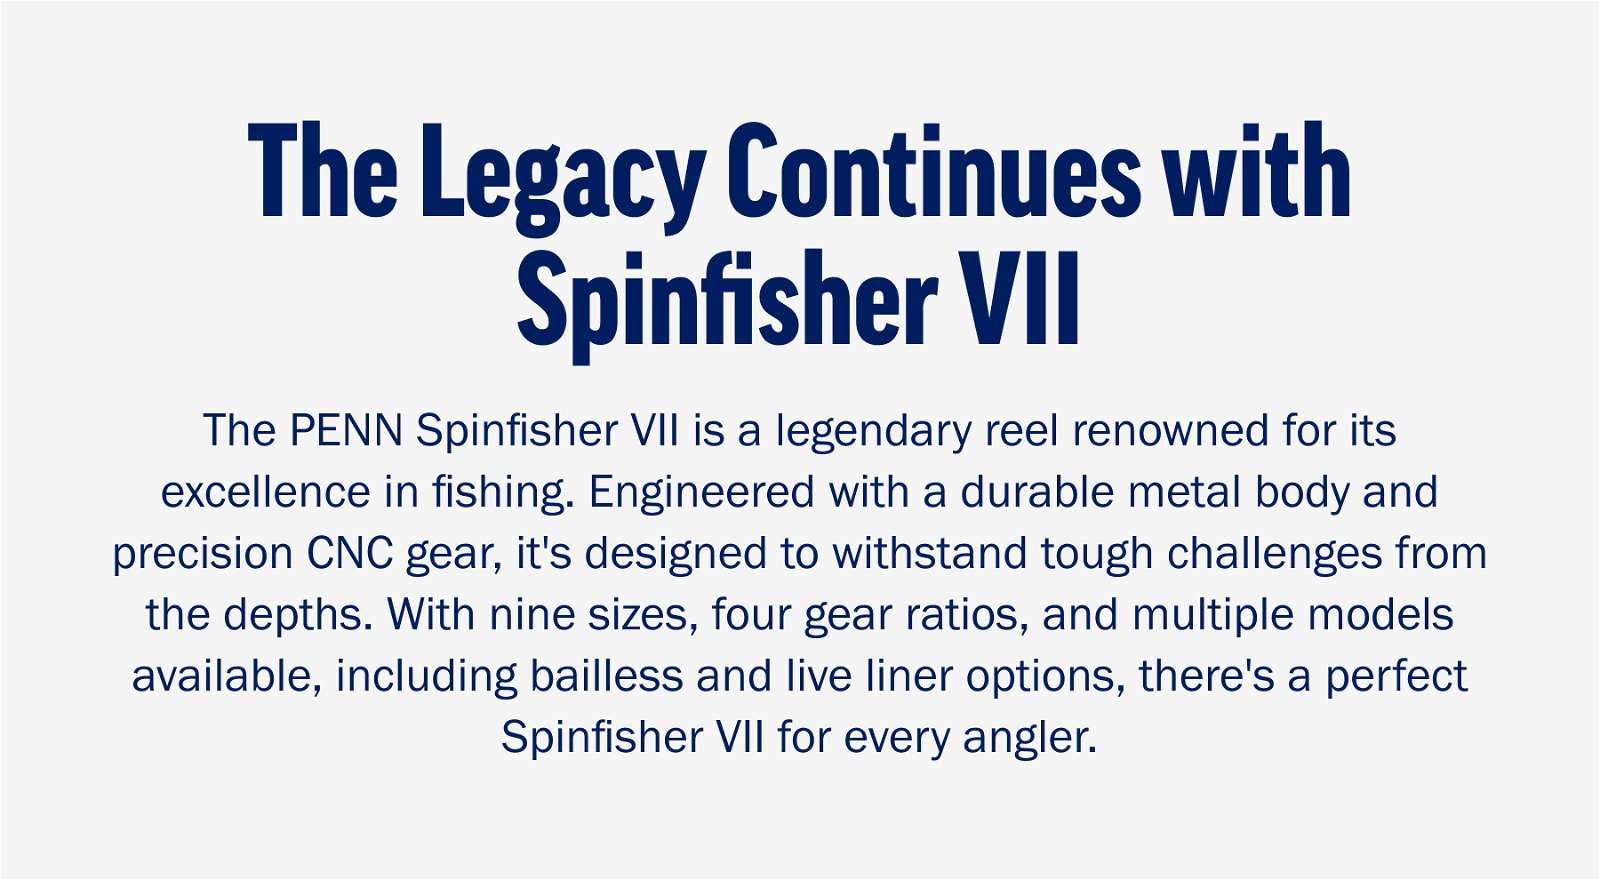 The Legacy Continues with Spinfisher VII